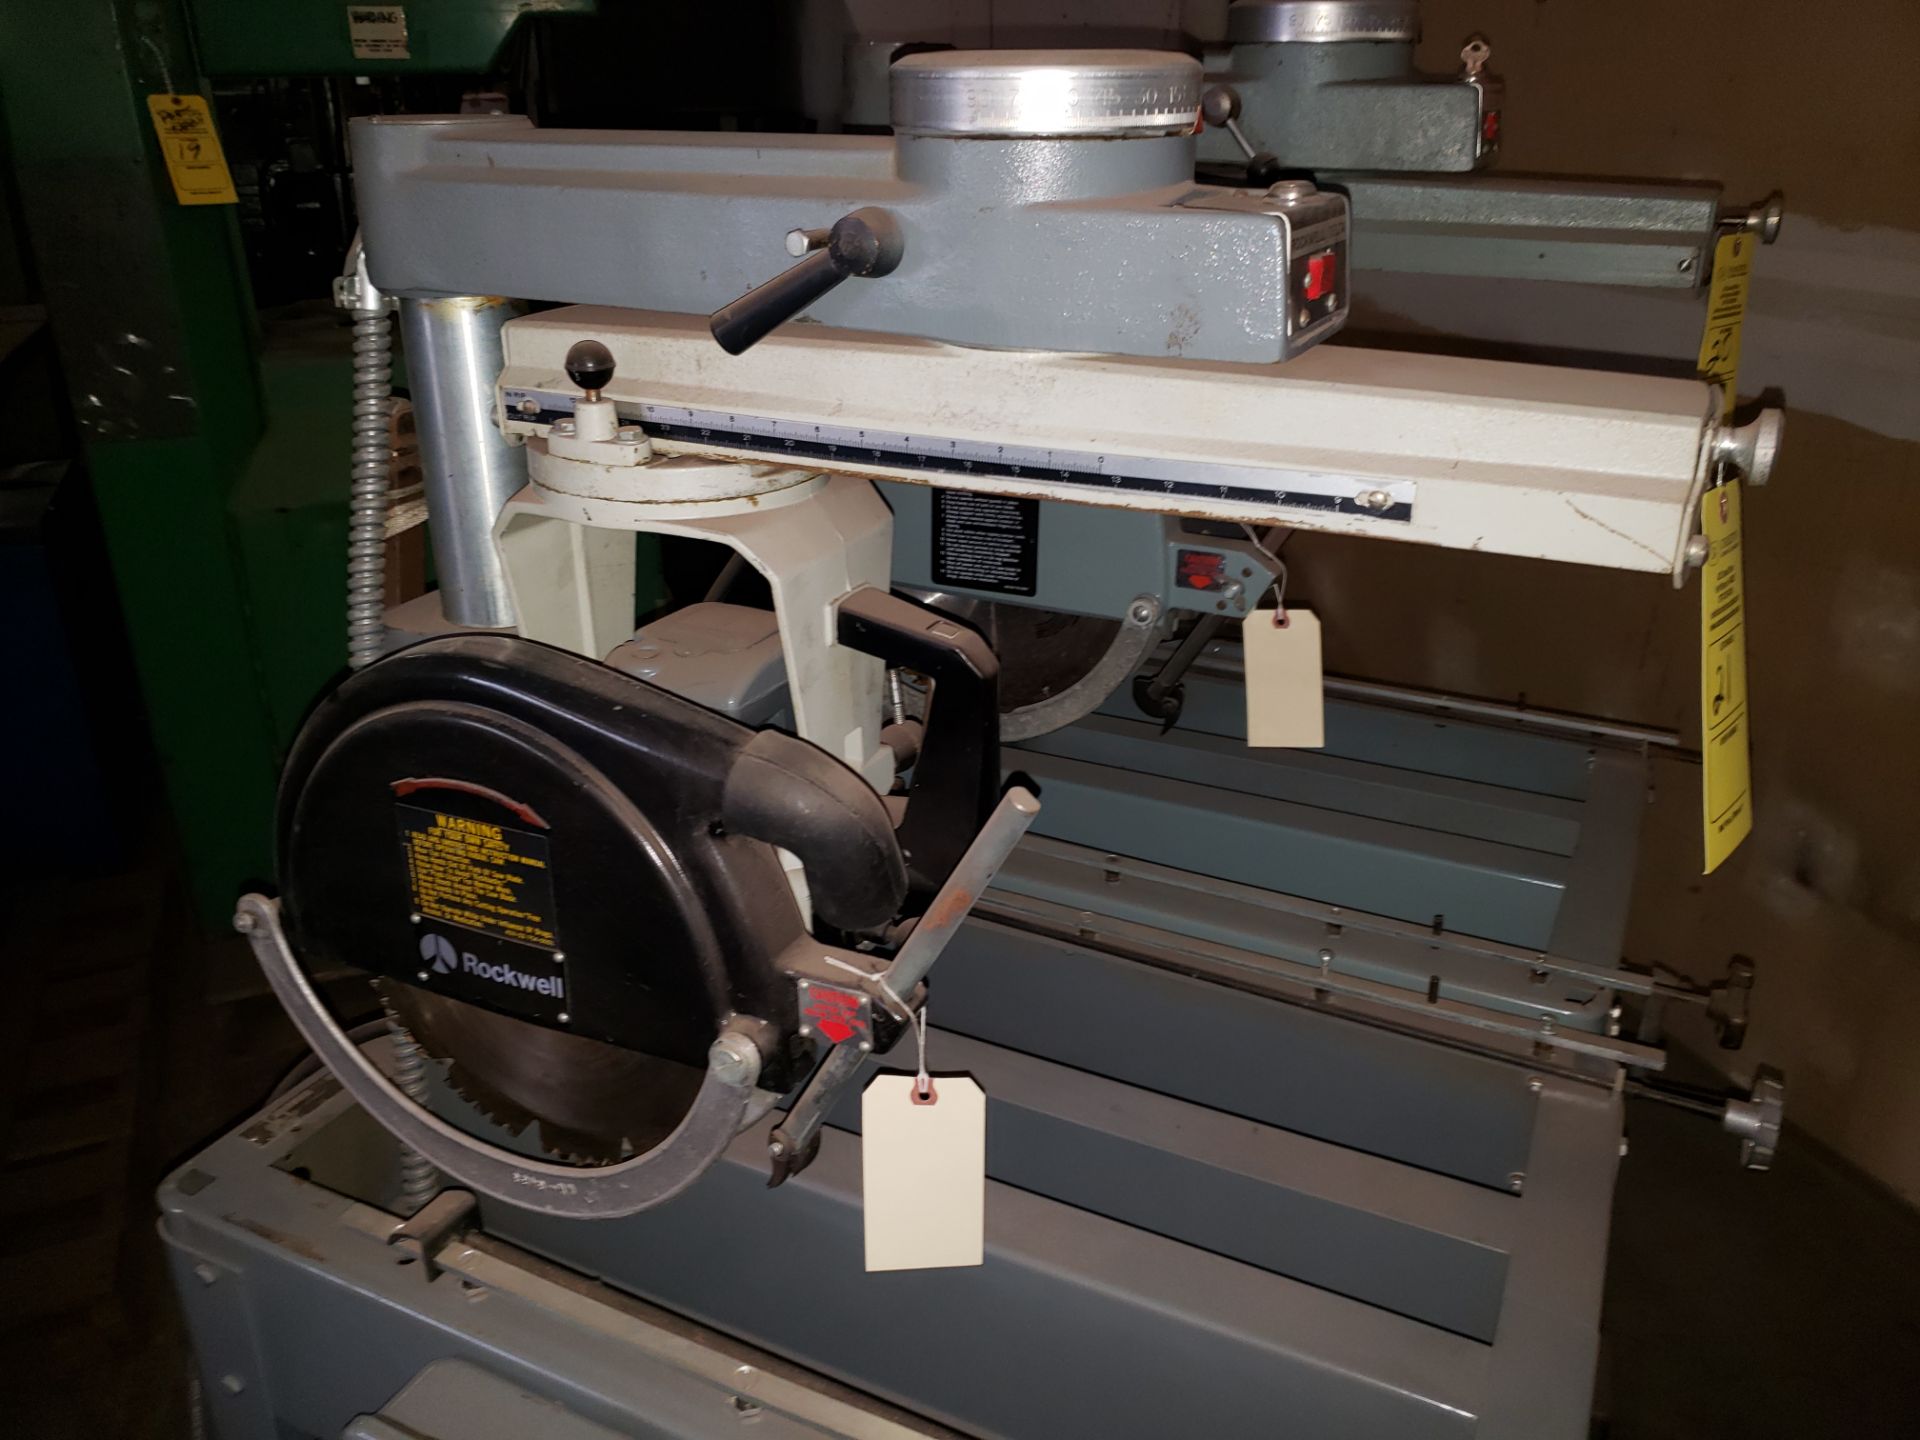 ROCKWELL 12" RADIAL ARM SAW CAT#12-RAS S#LH9941 2HP/3PH - Image 2 of 2